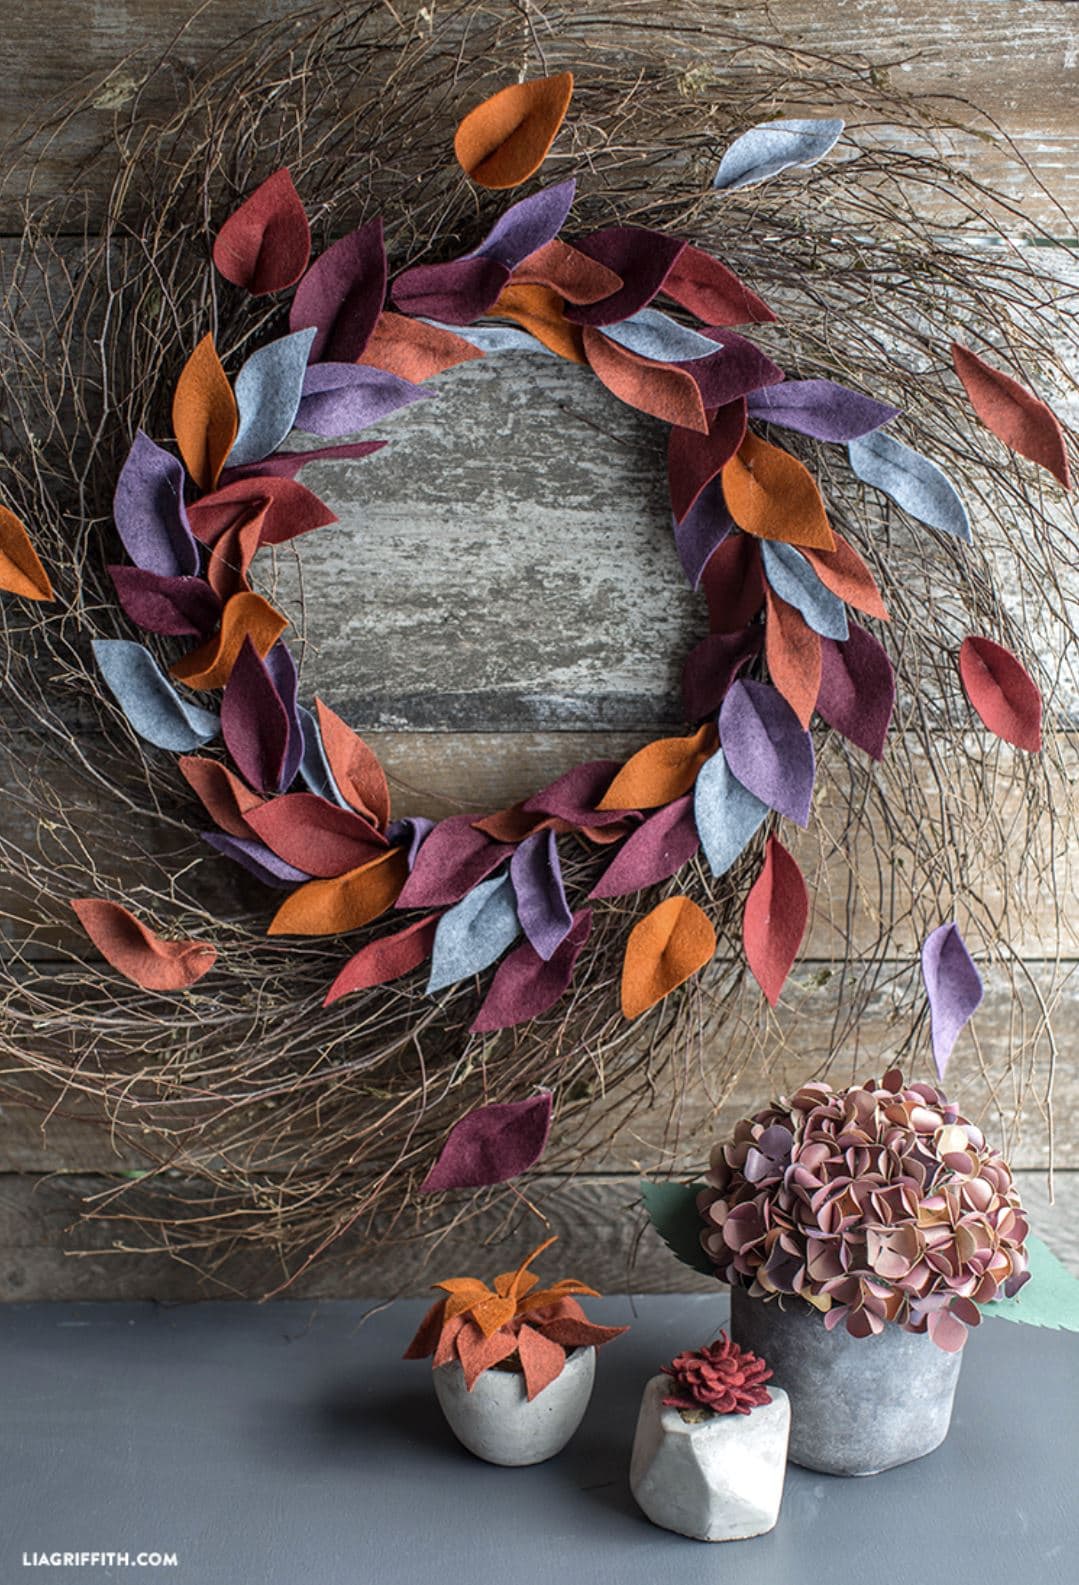 A fall wreath with colorful felt leaves.